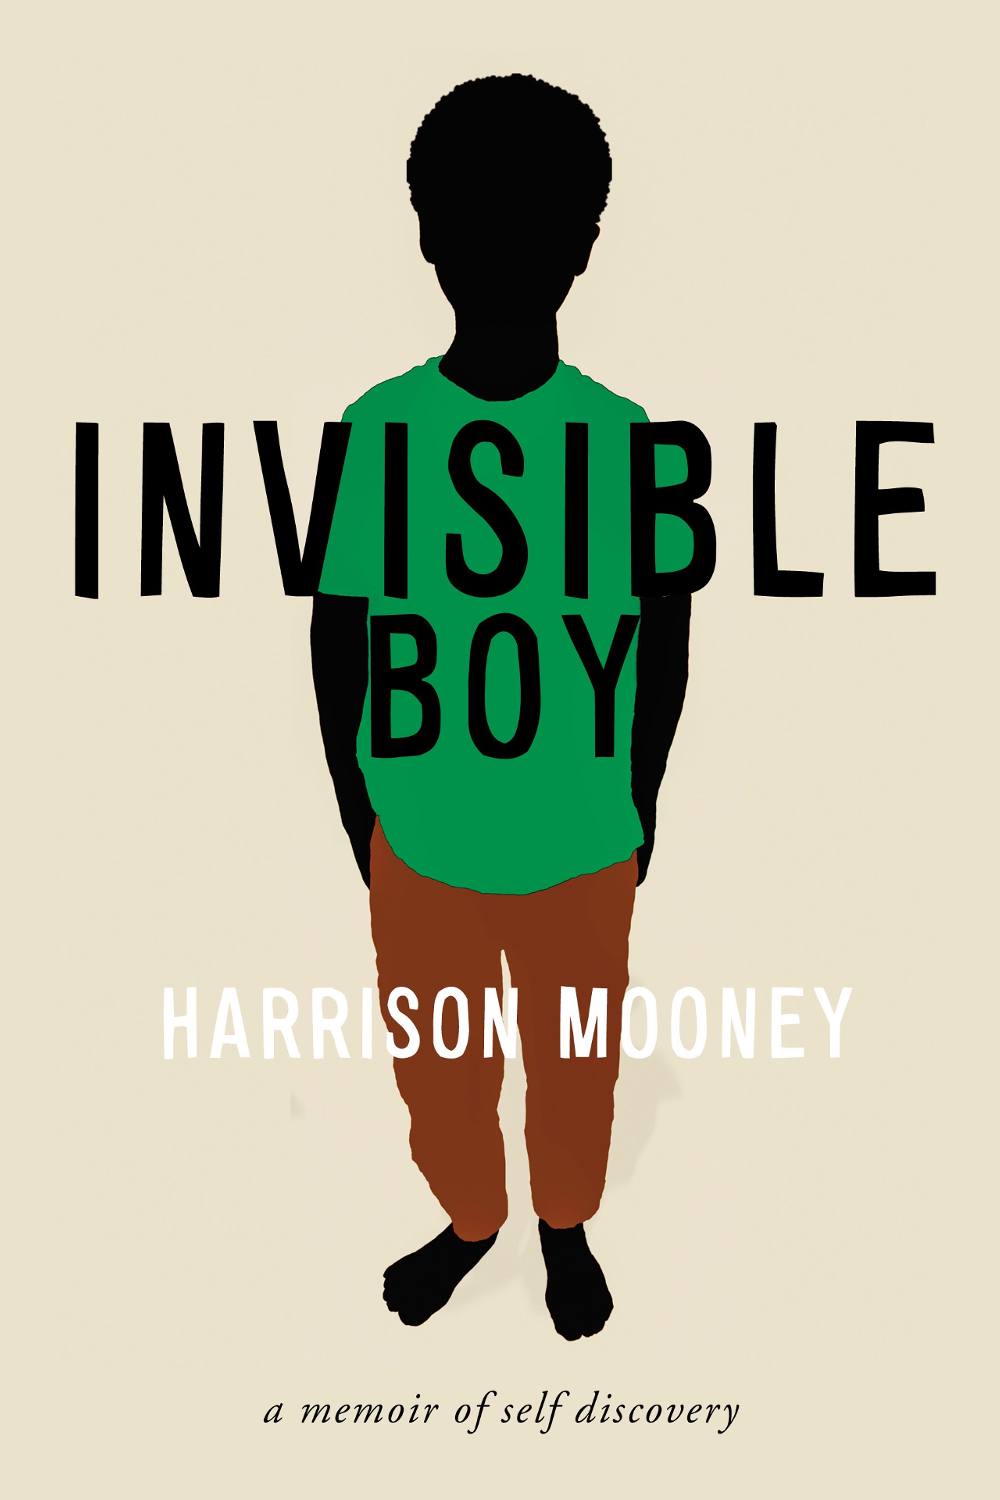 The book cover image for Harrison Mooney’s Invisible Boy features an illustration of young Mooney in silhouette. He is wearing a green T-shirt and brown pants.